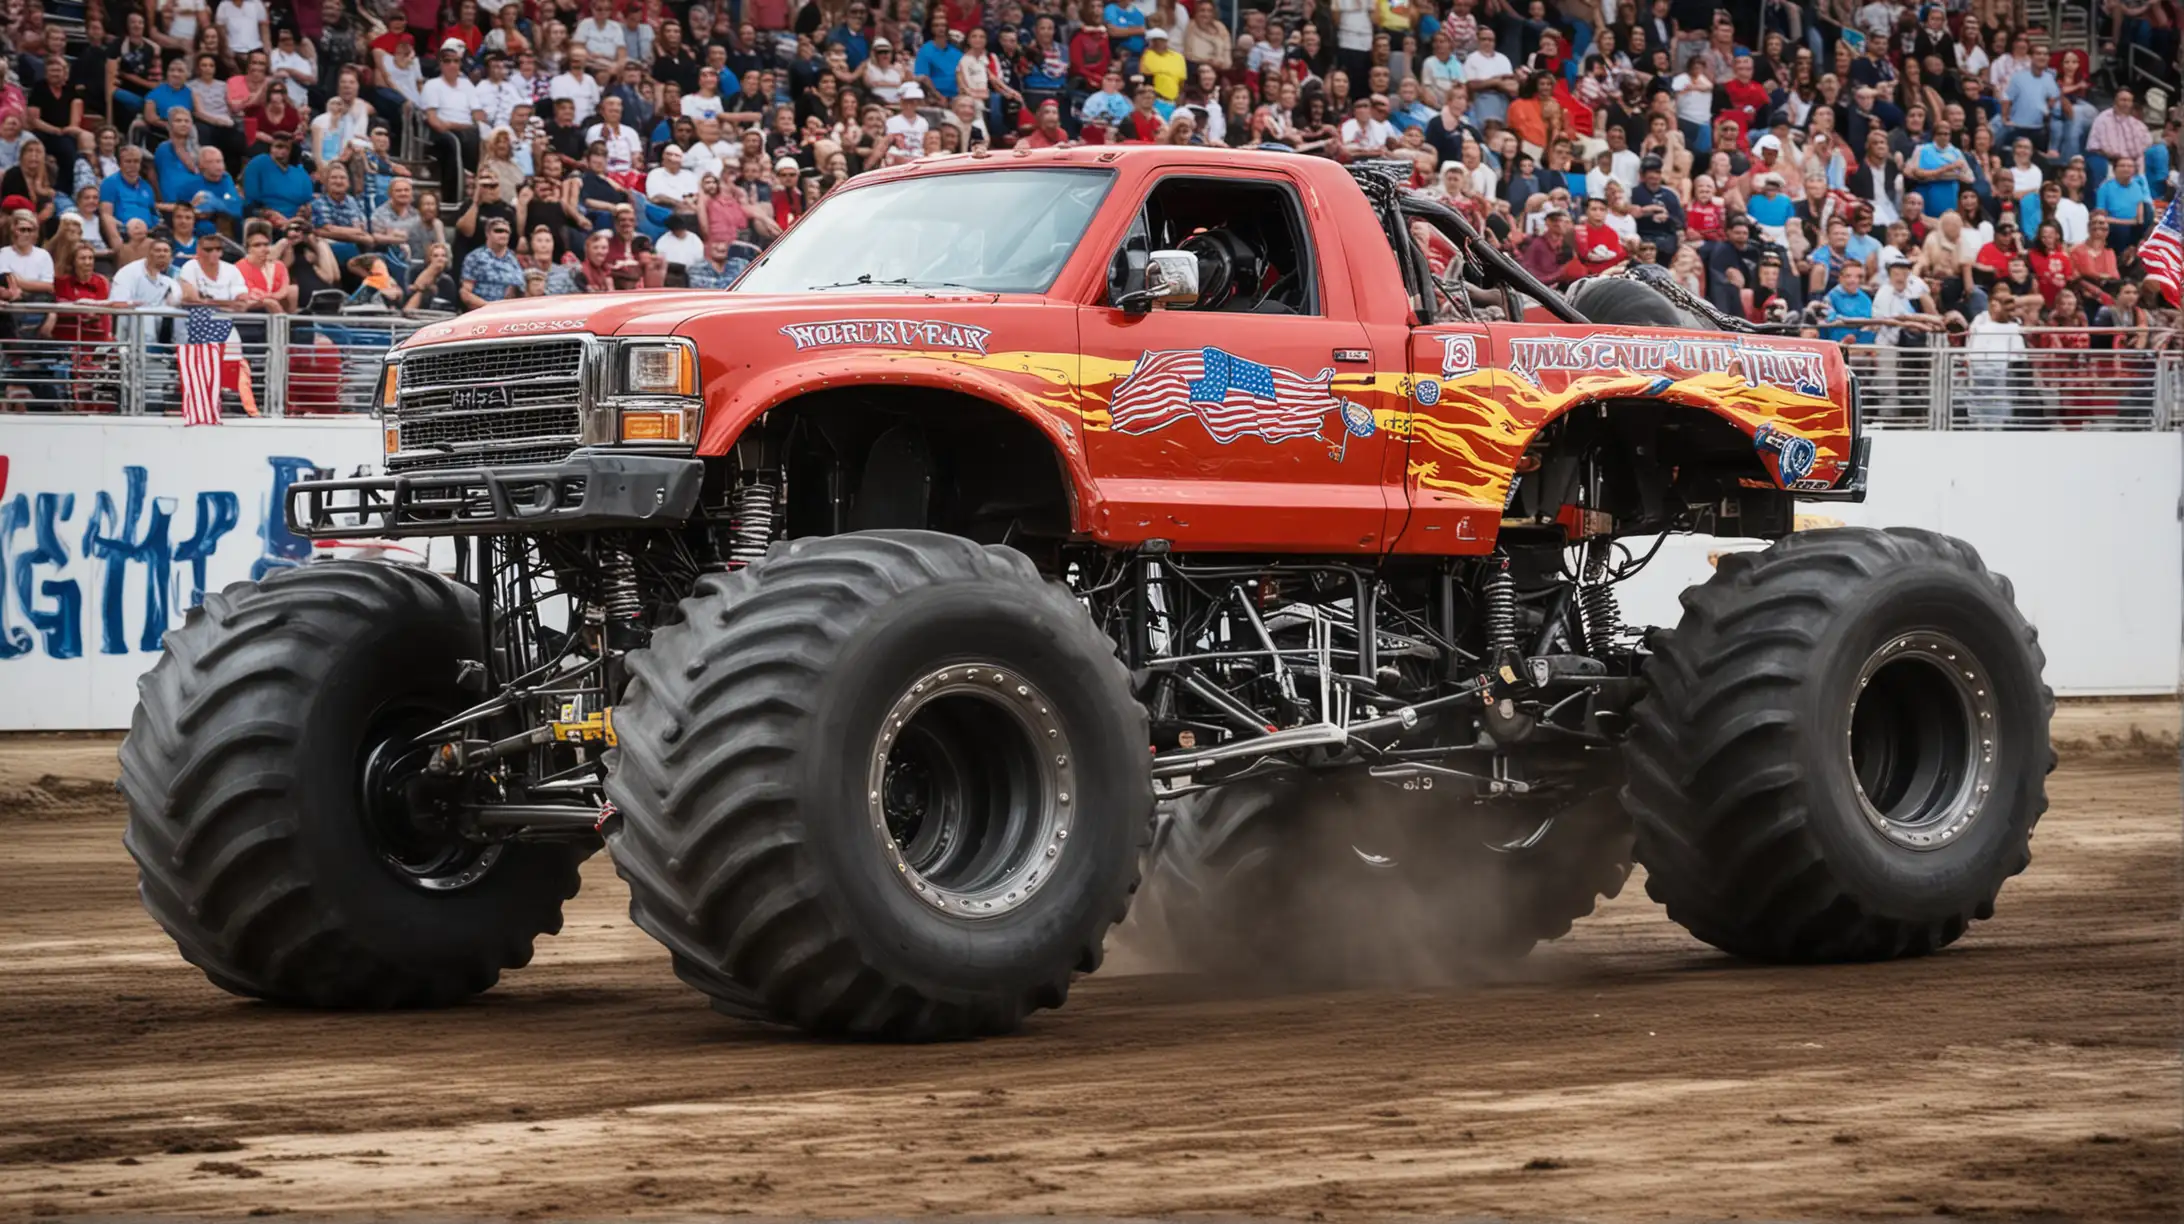 Exciting Monster Truck Show at the USA State Fair